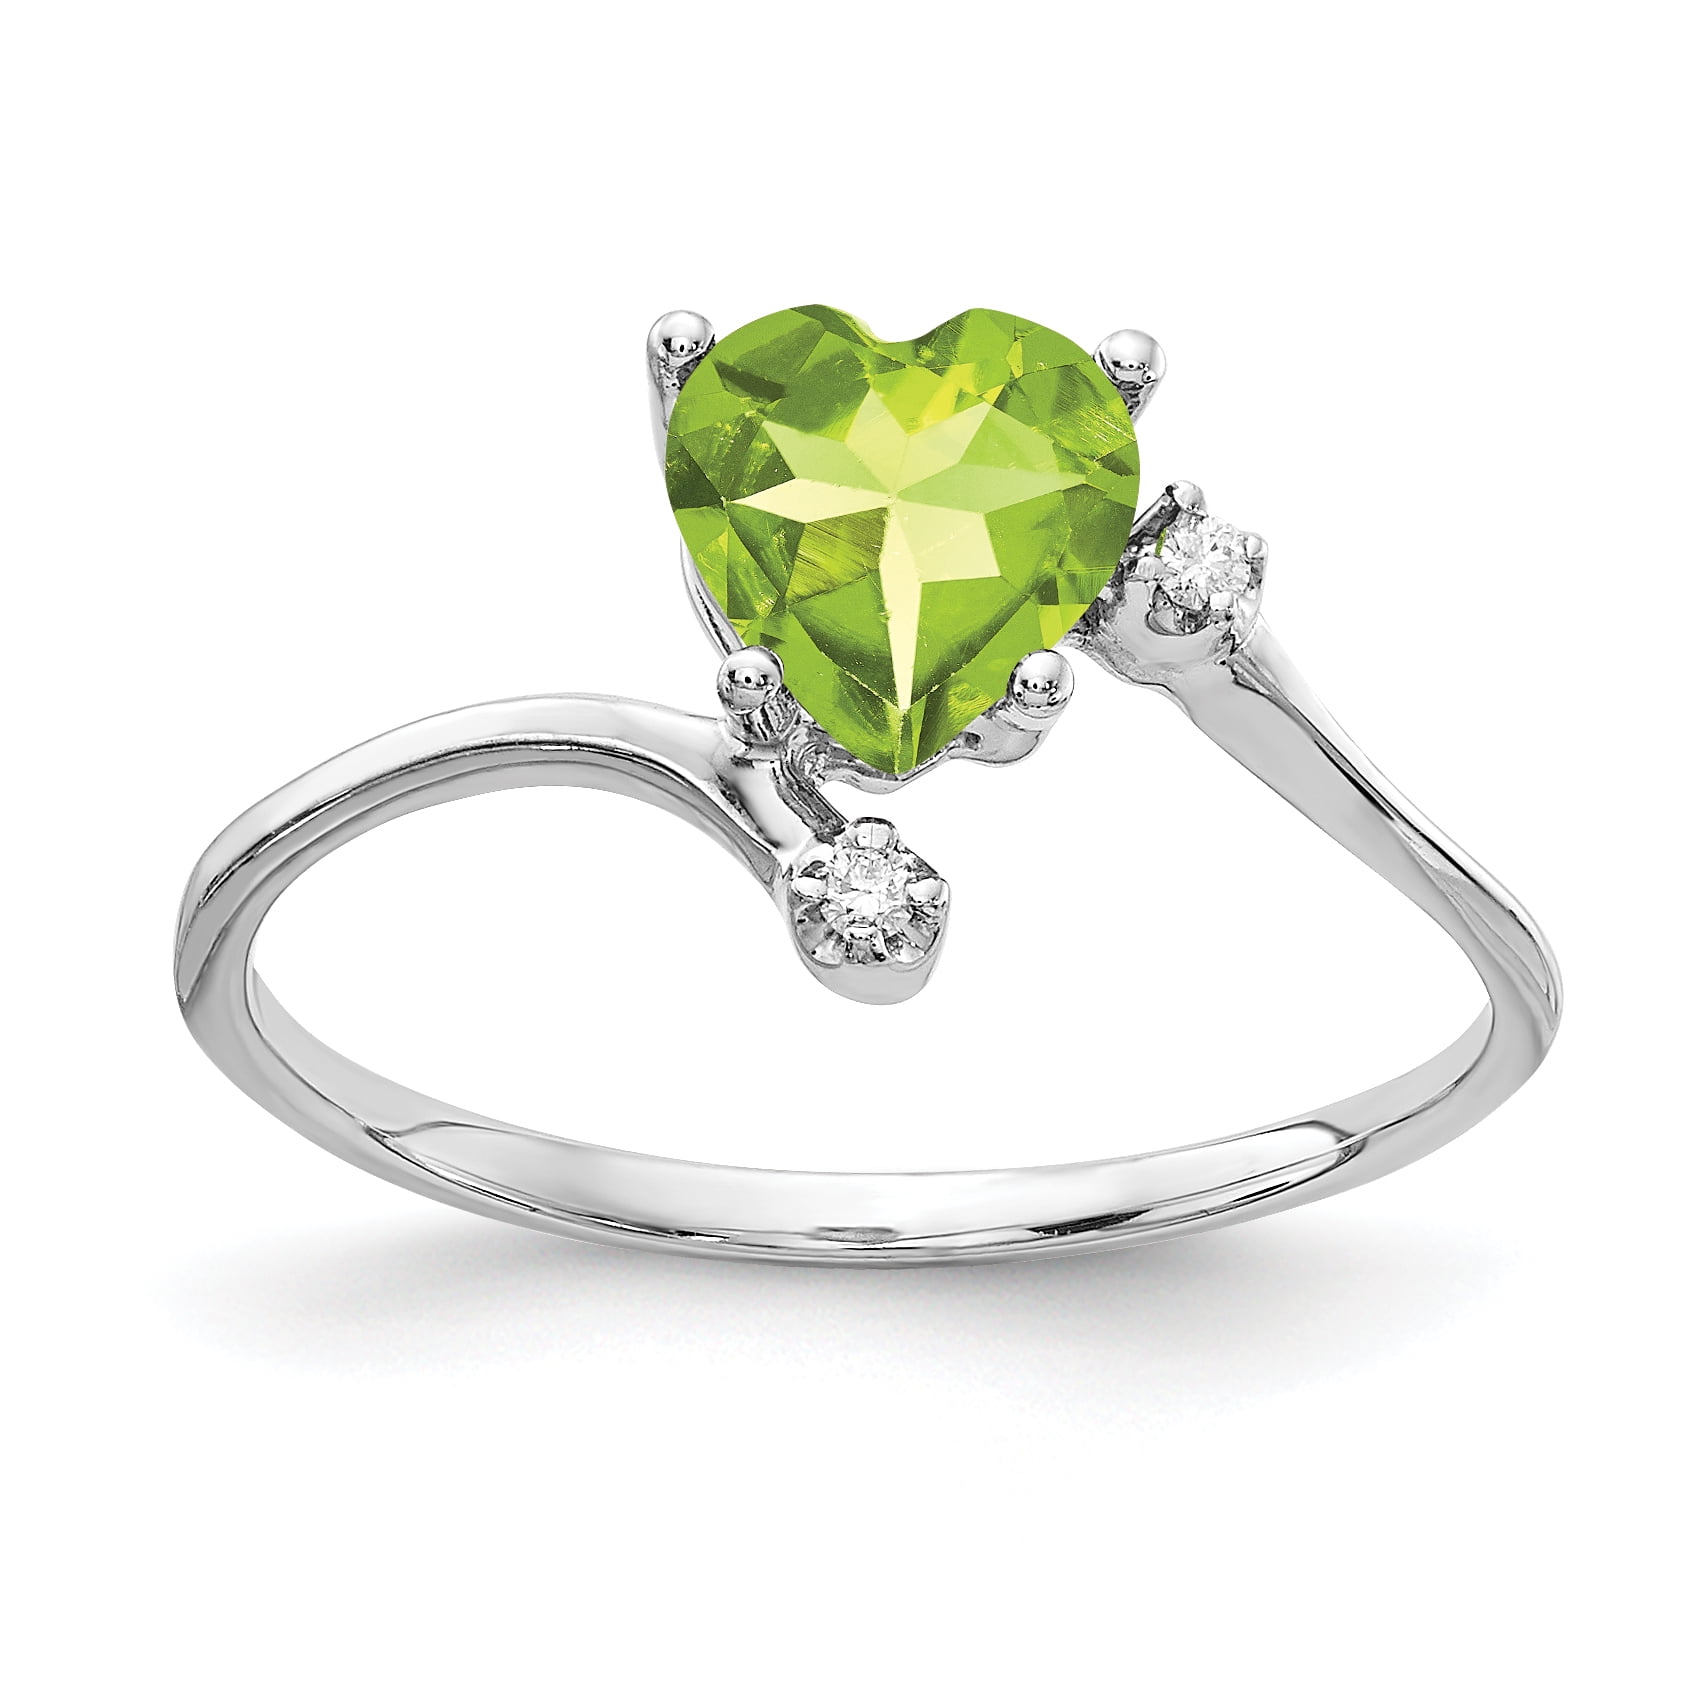 happiness size 4.5 one of a kind ring 6mm peridot one of a kind sterling silver stamped